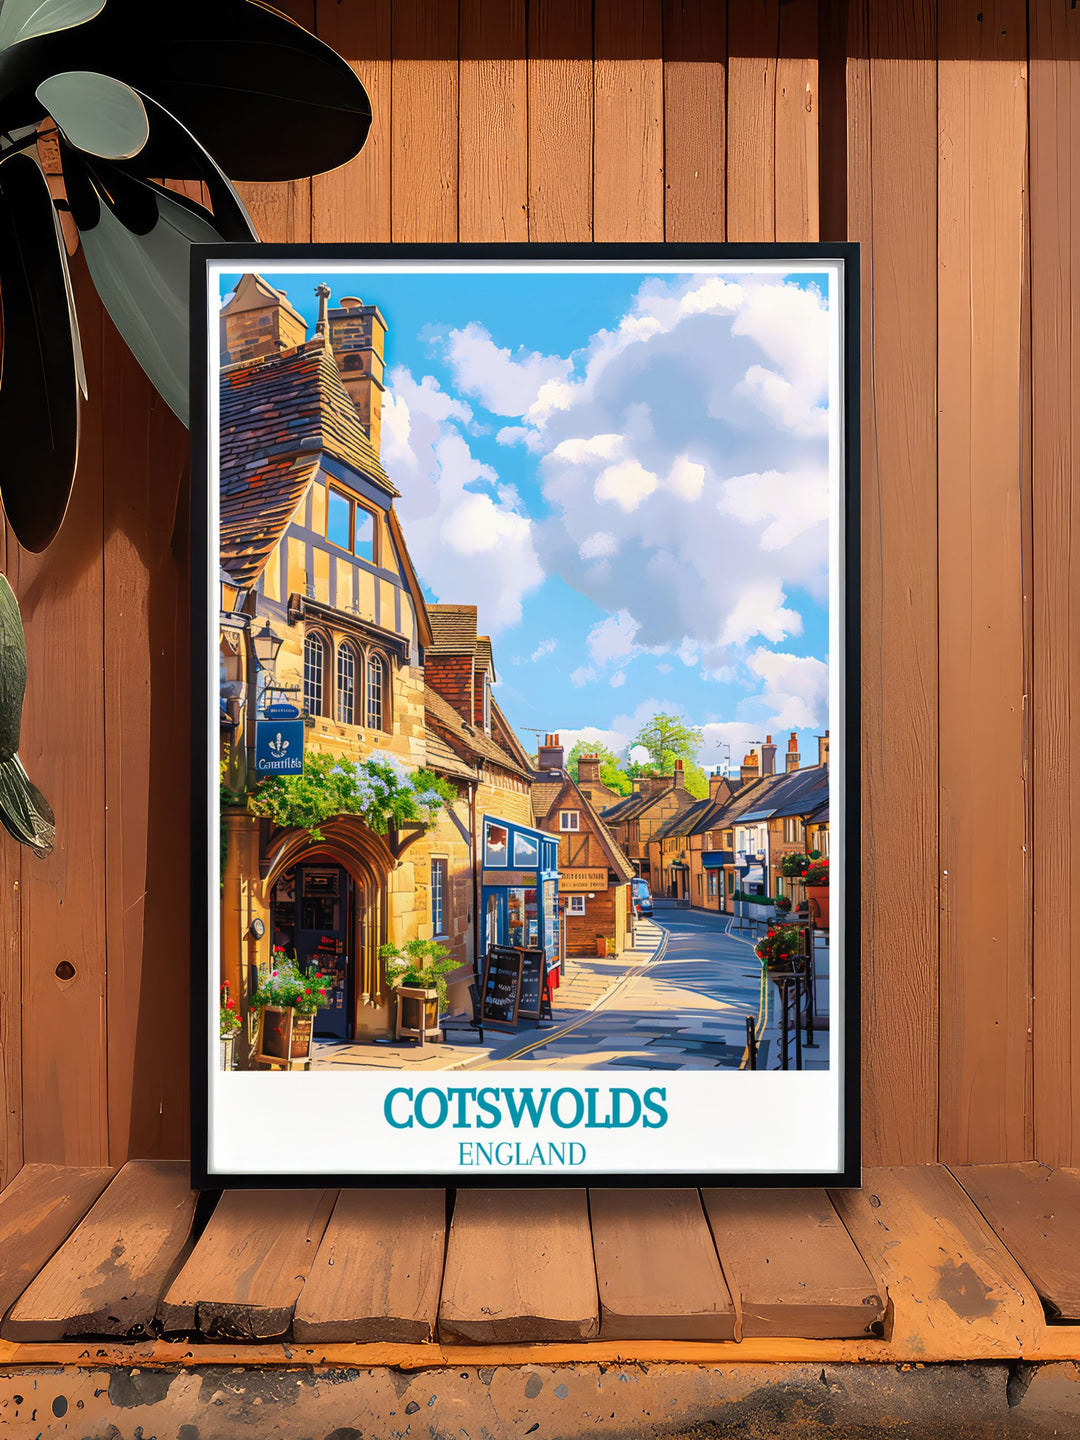 Admire the scenic vistas of the Cotswolds with this artwork, depicting the rolling hills and quaint villages surrounding Chipping Campden, bringing the timeless beauty of England into your home.